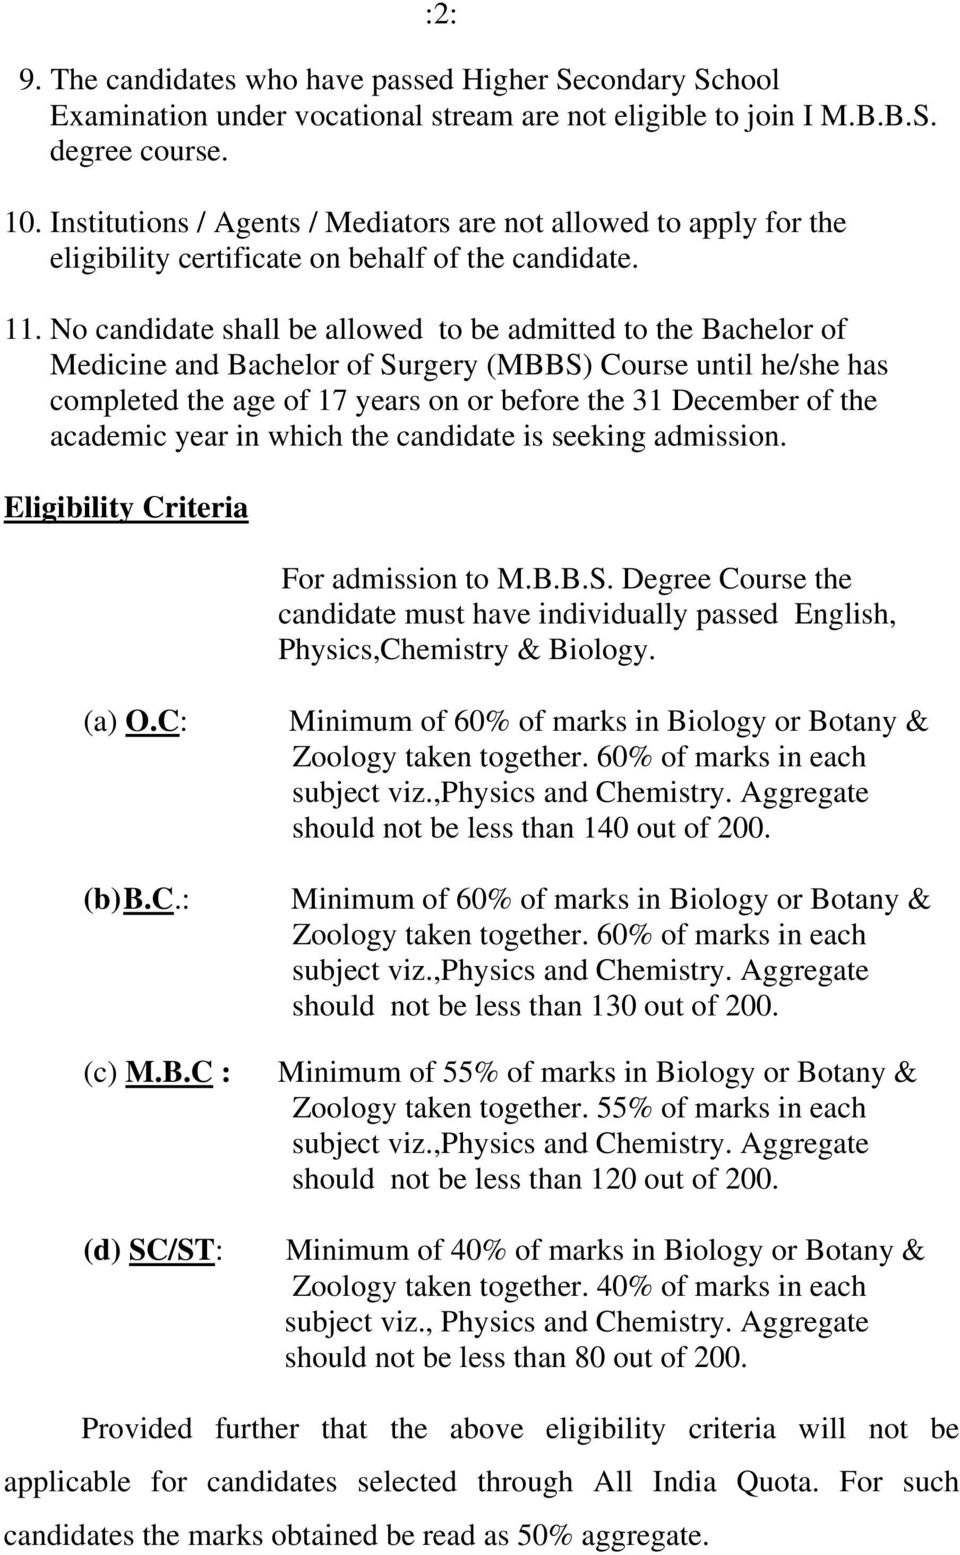 No candidate shall be allowed to be admitted to the Bachelor of Medicine and Bachelor of Surgery (MBBS) Course until he/she has completed the age of 17 years on or before the 31 December of the